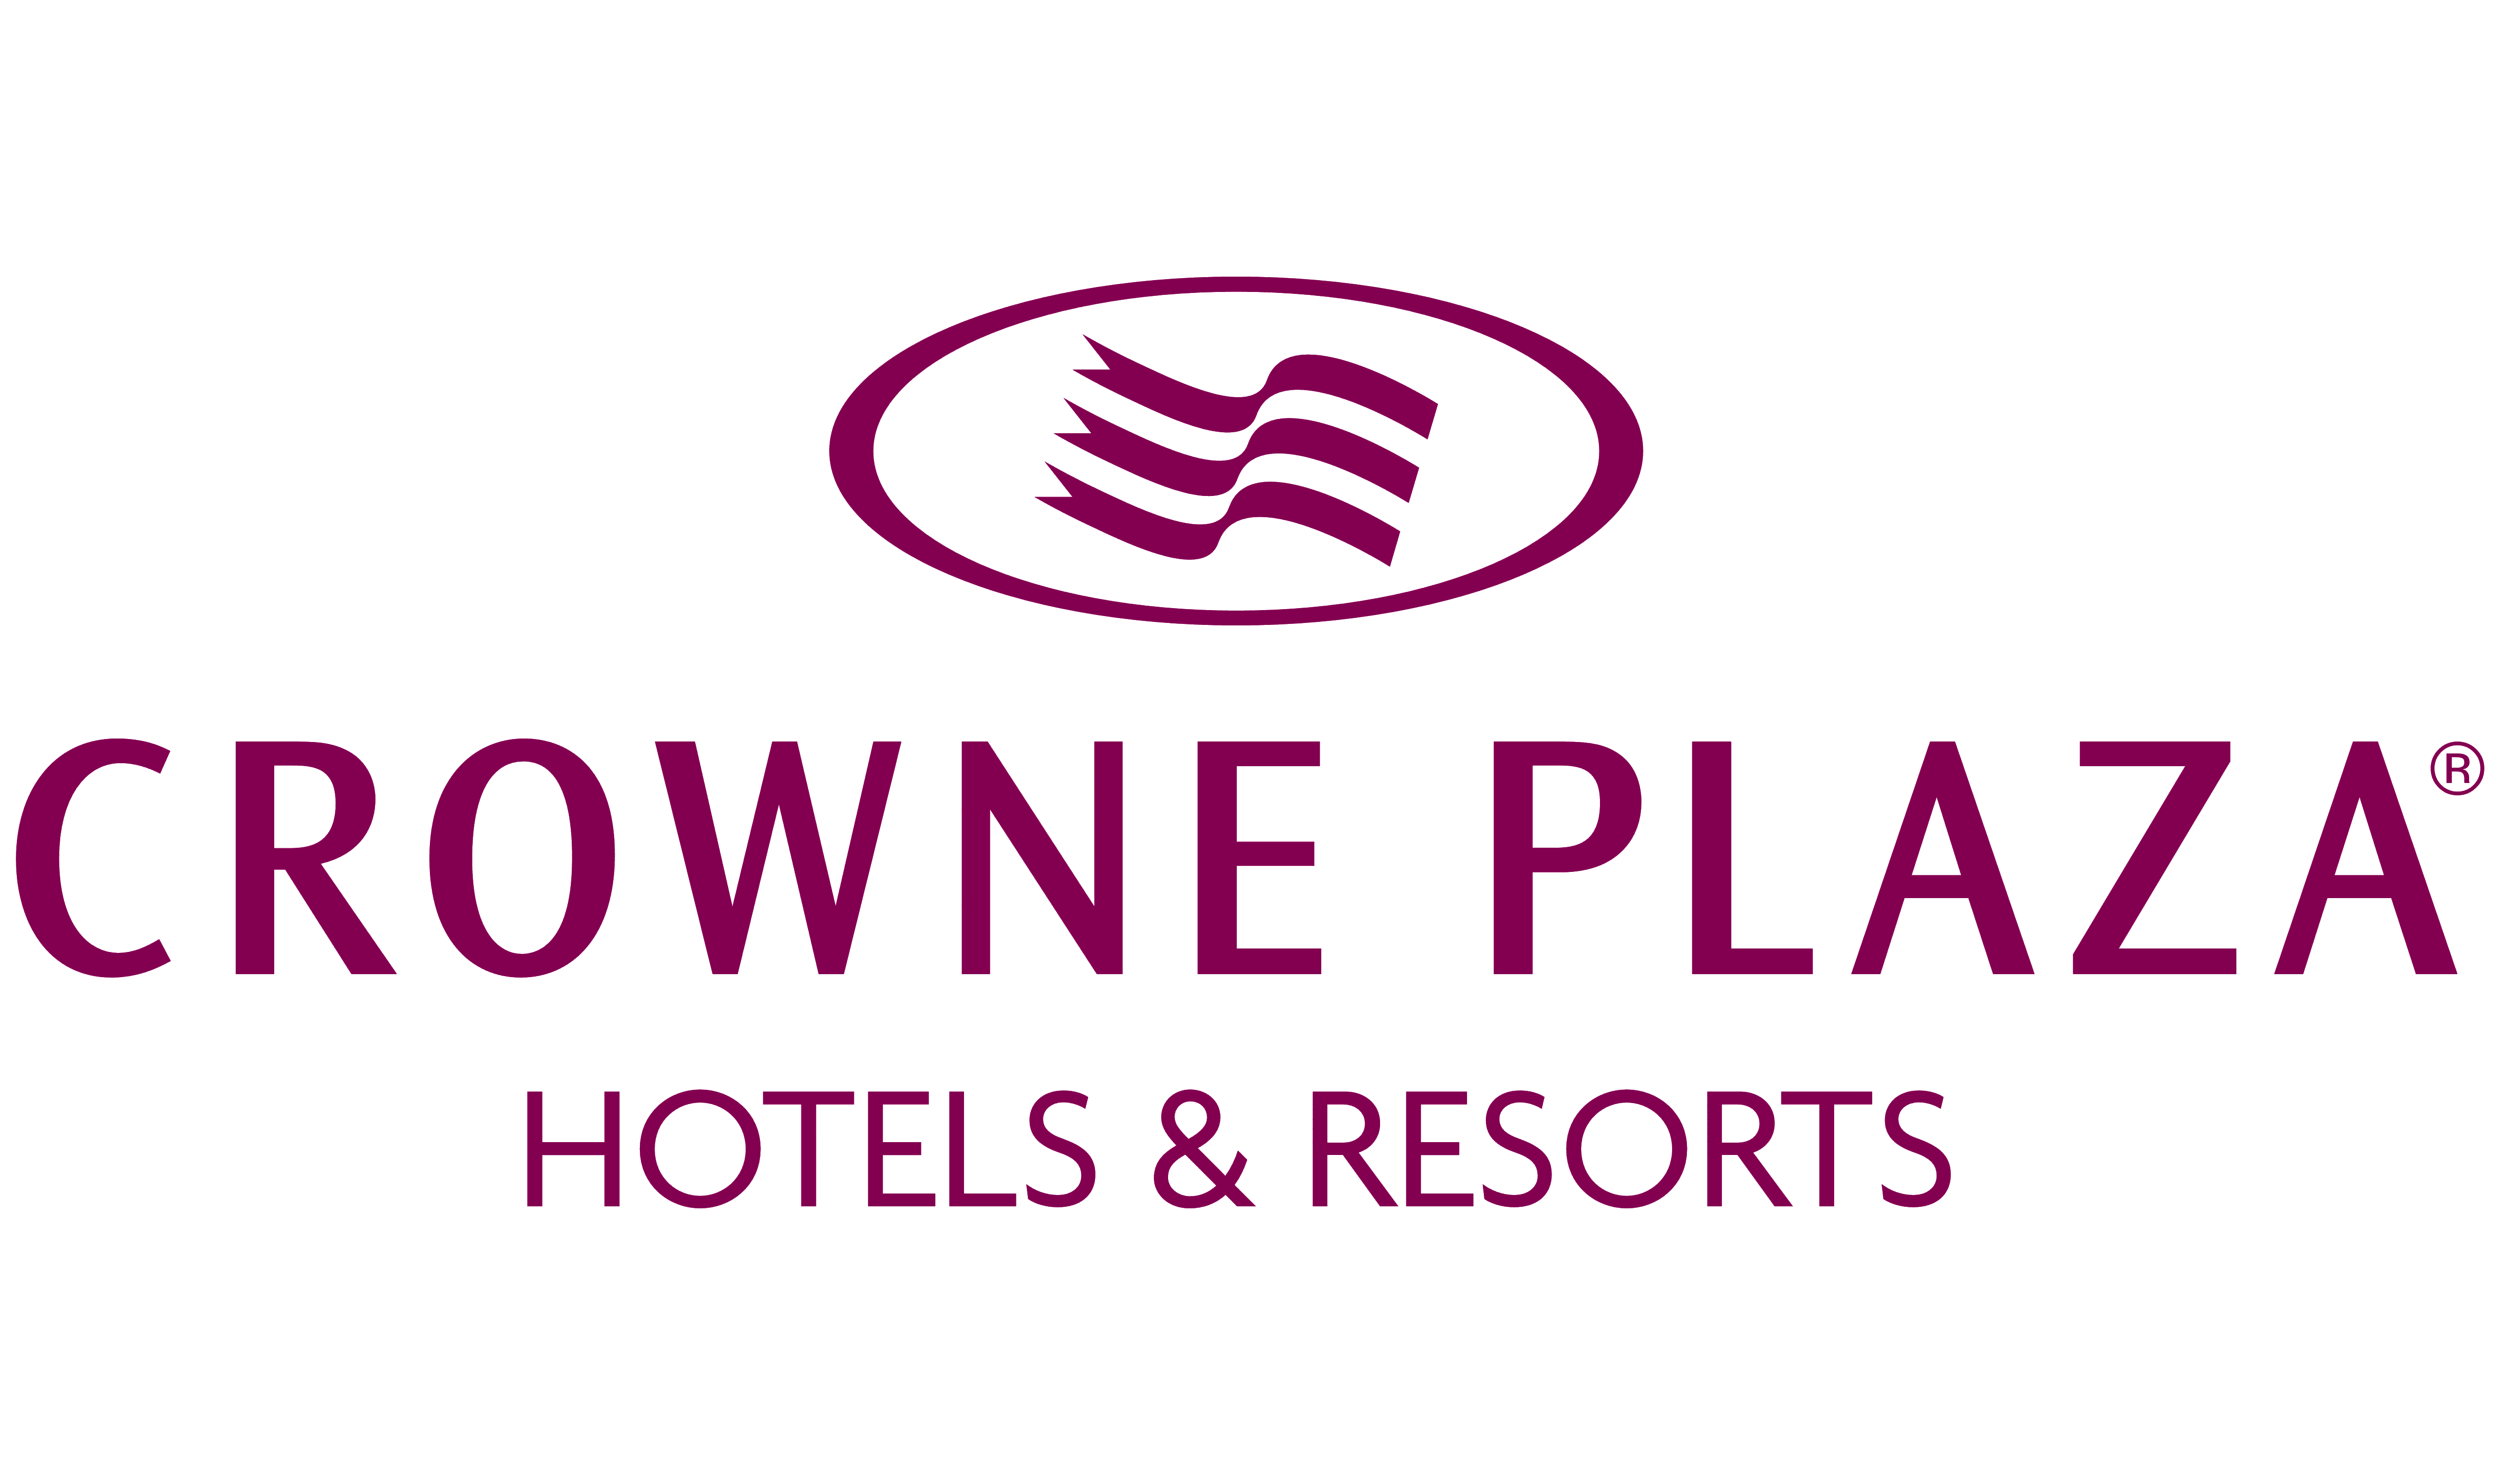 Our partner Crown Plaza